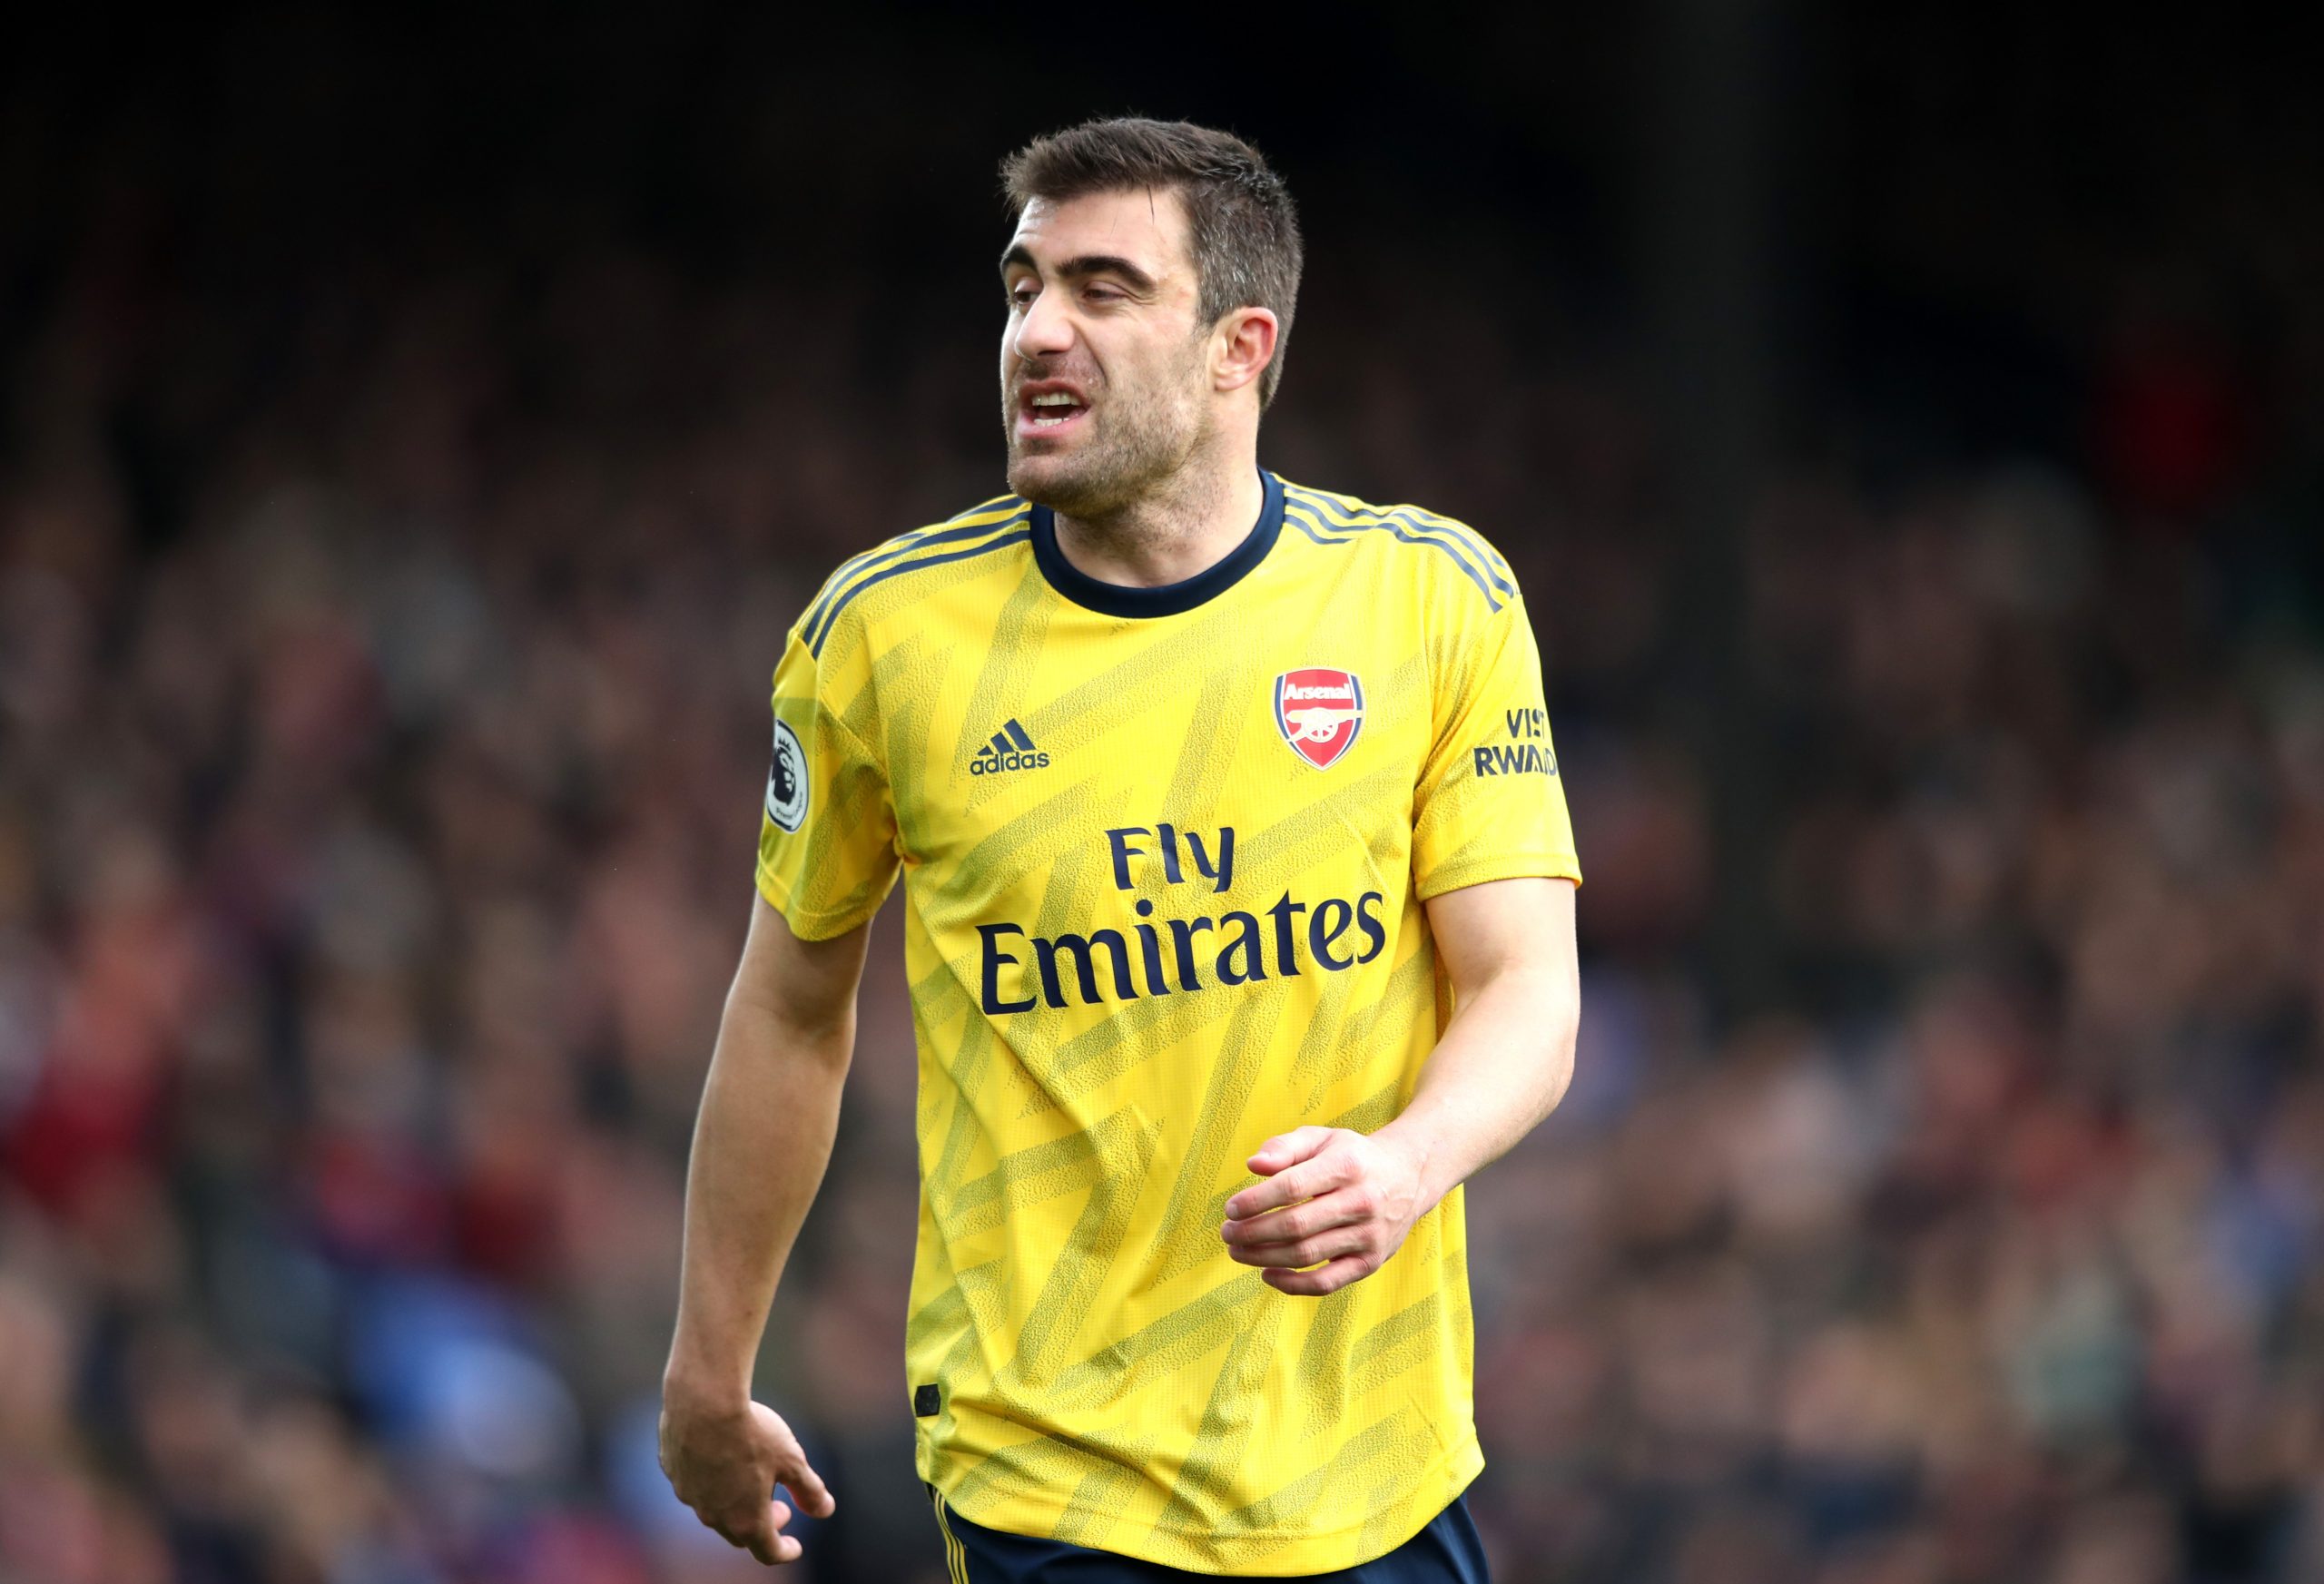 Arsenal are facing an uphill task of offloading Sokratis - They must sell him.